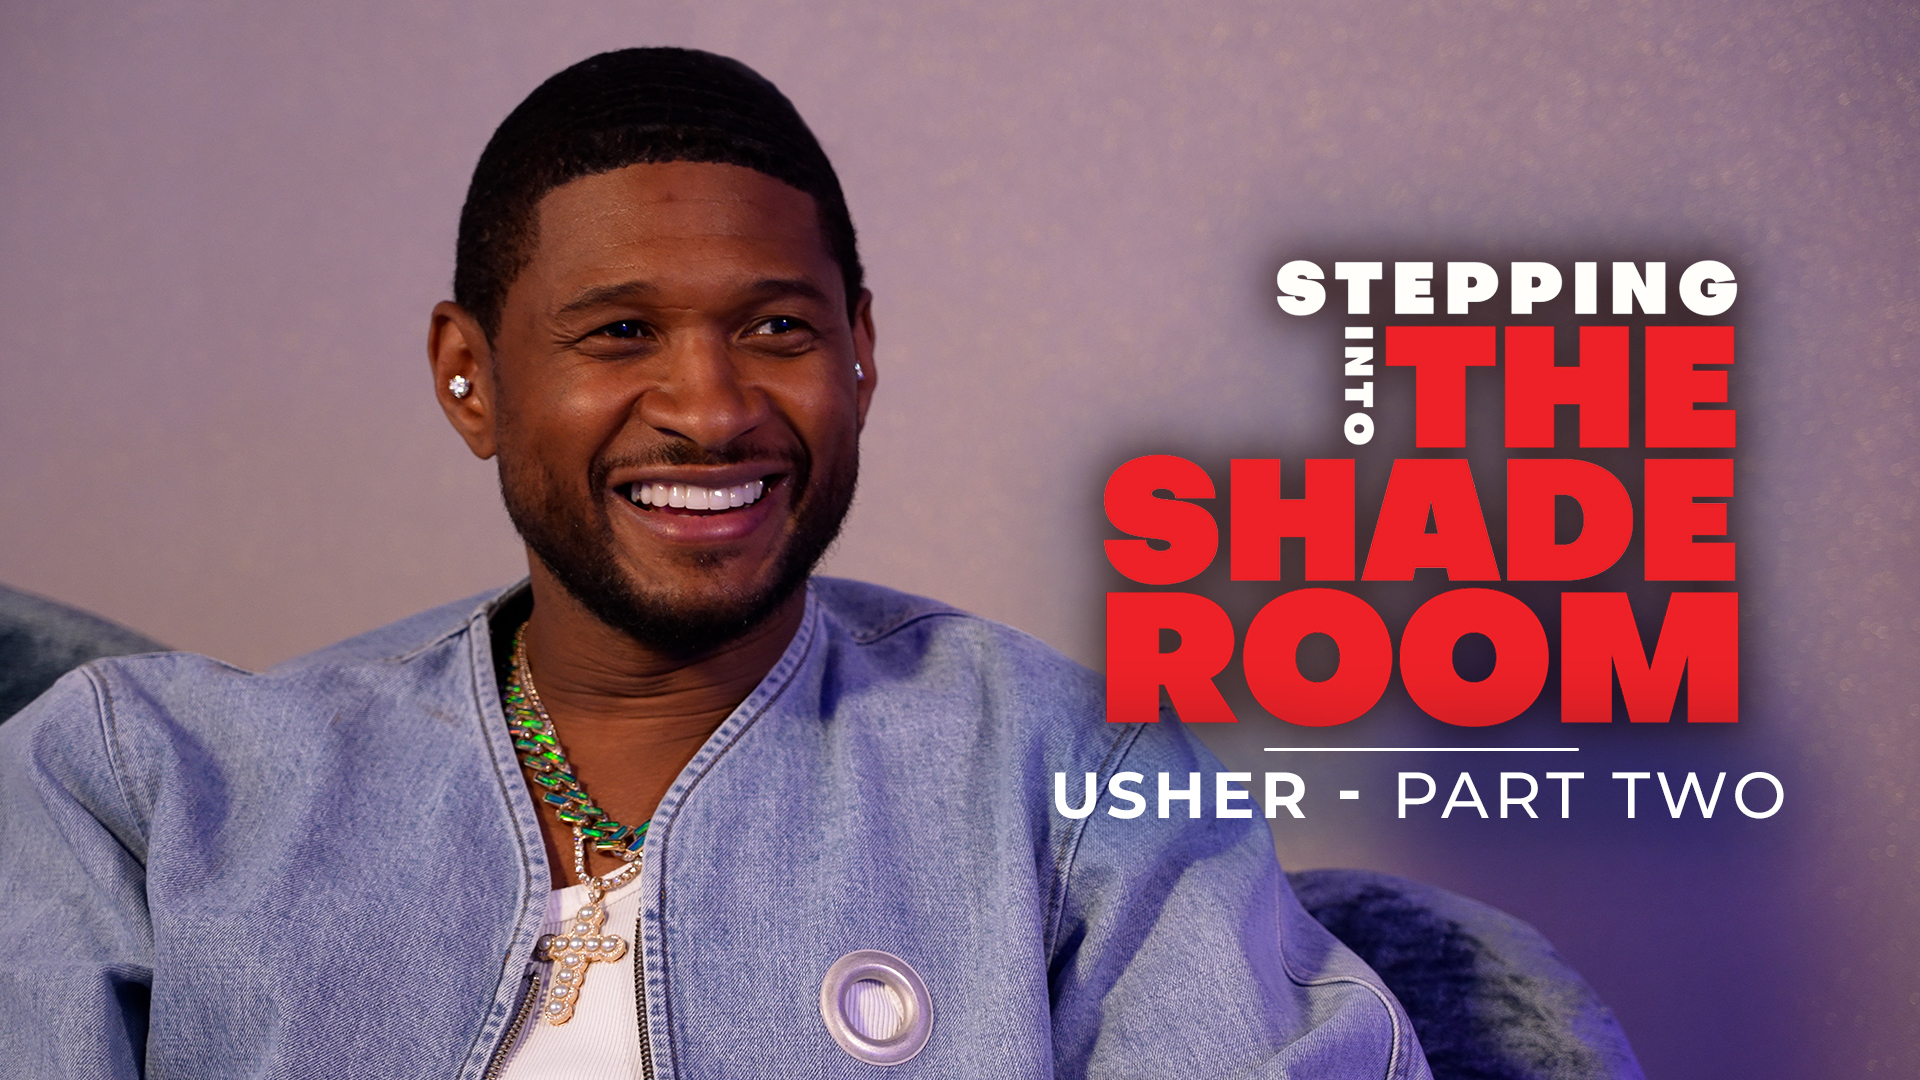 Usher Shares If He Thinks He's the 'King of R&B' (Exclusive Video)

